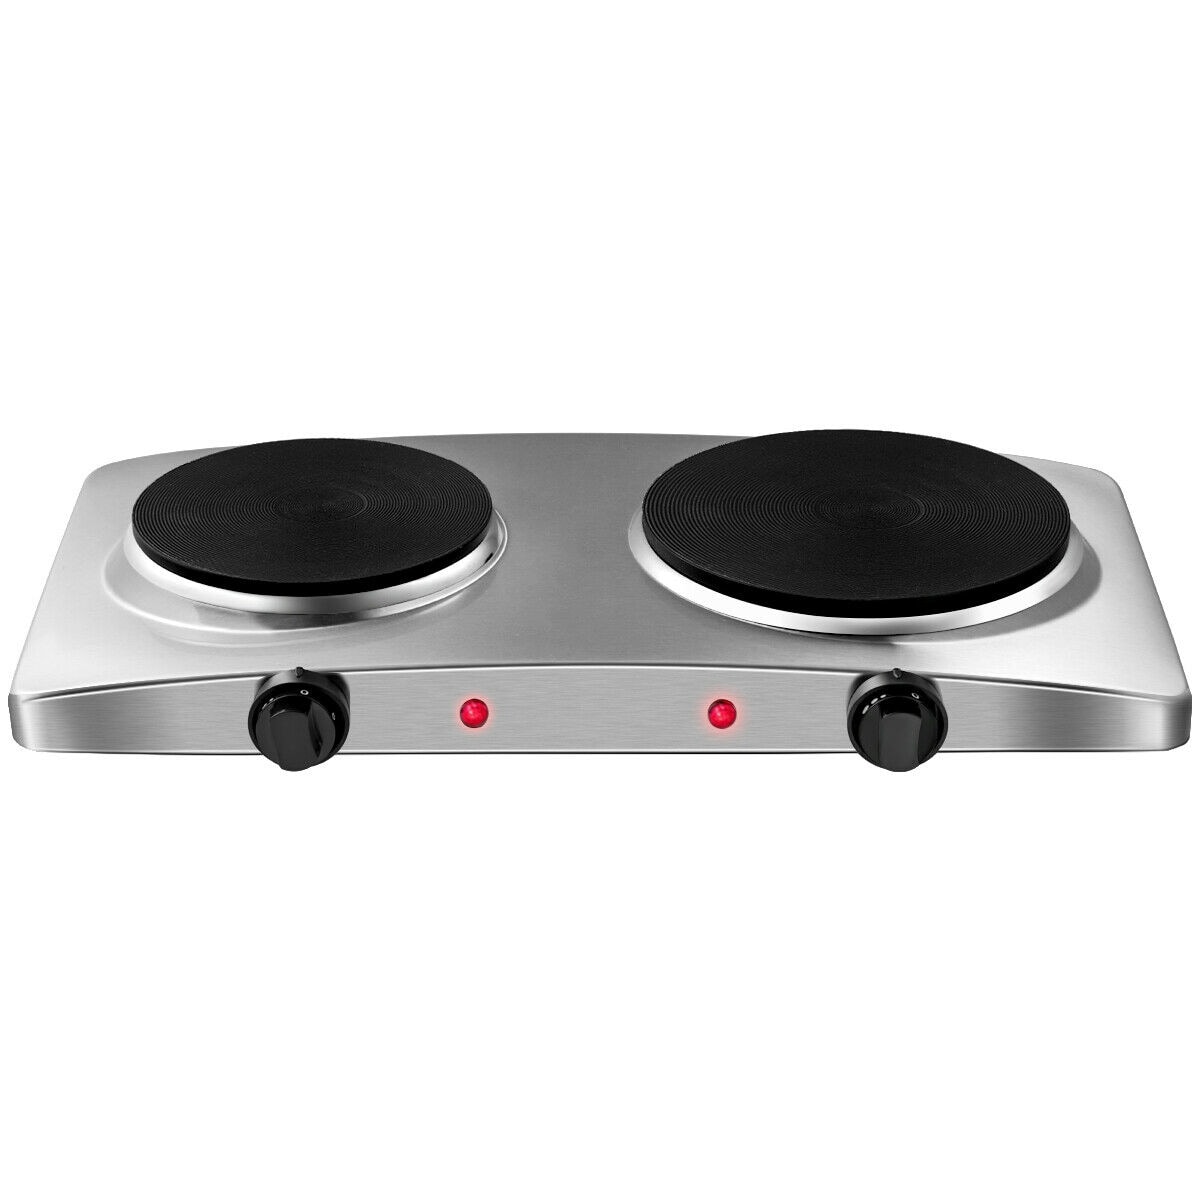 Double Hot Plate for Cooking, Moclever Electric Double Burner, 2000w  Portable Electric Stove w/Independent Dual Control & 5 Level Temperature  Control